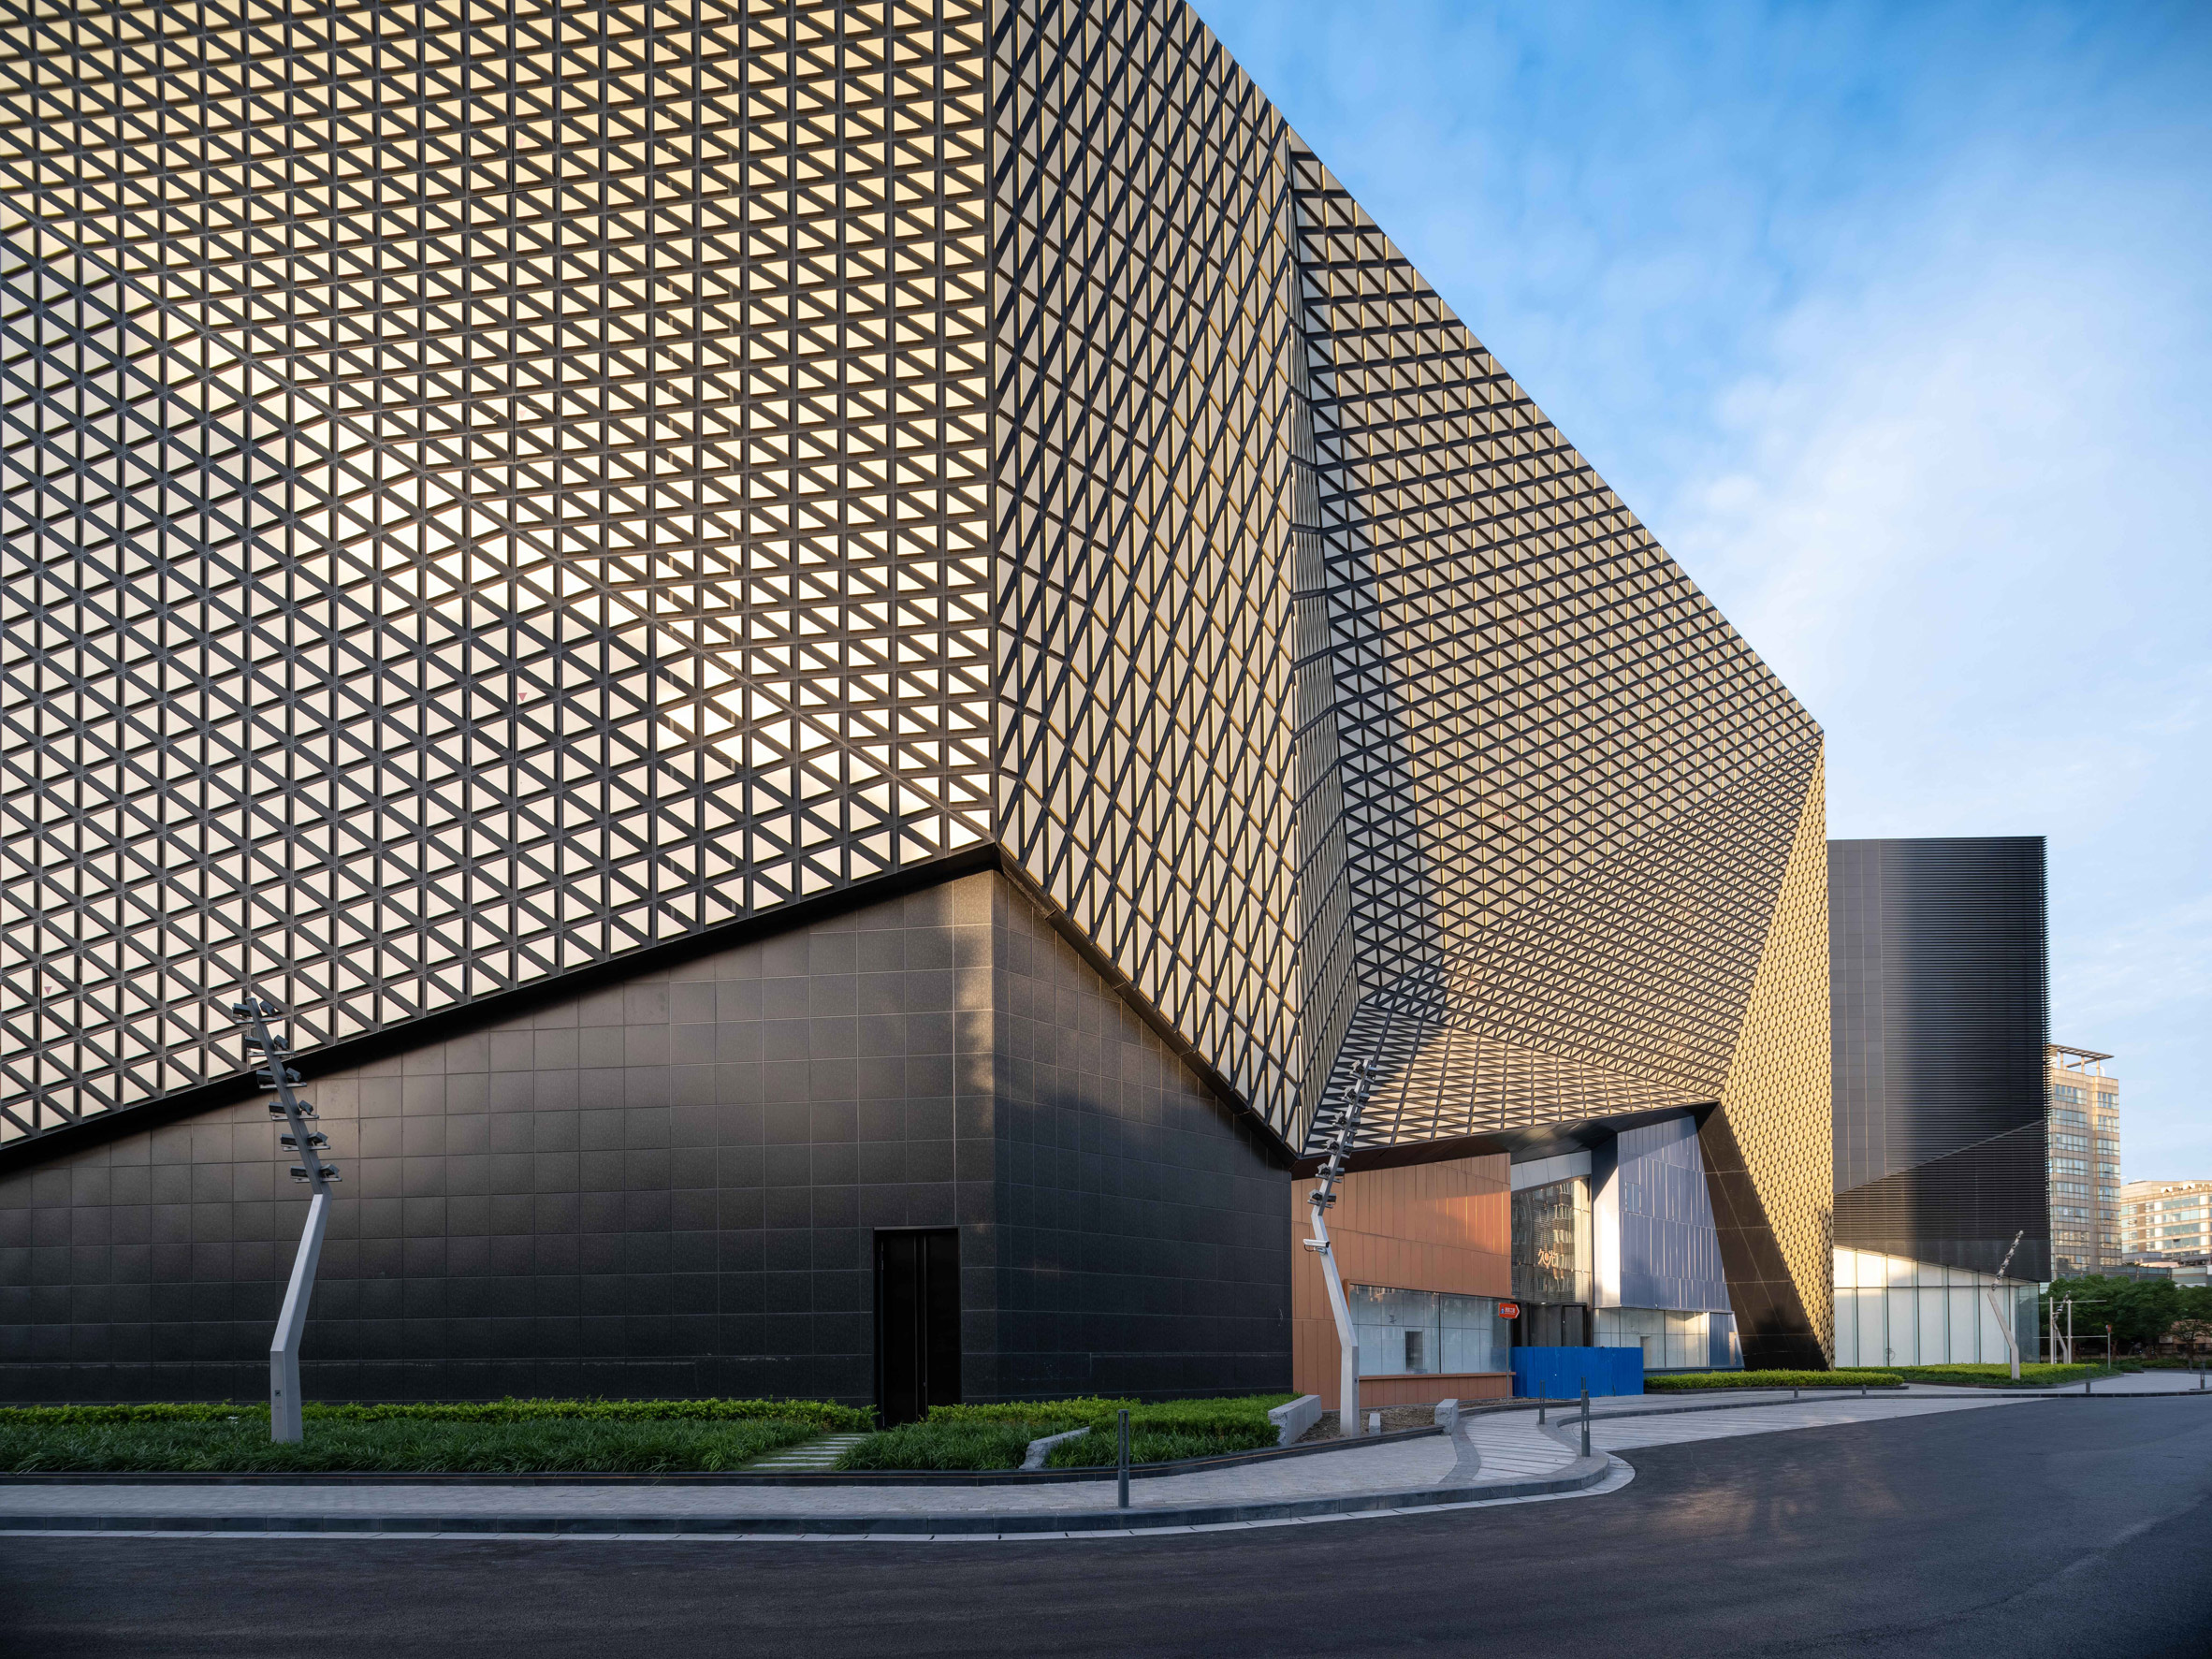 A photograph of the Shanghai Jiuguang Center's west side facade, which is clad with golden triangular blocks